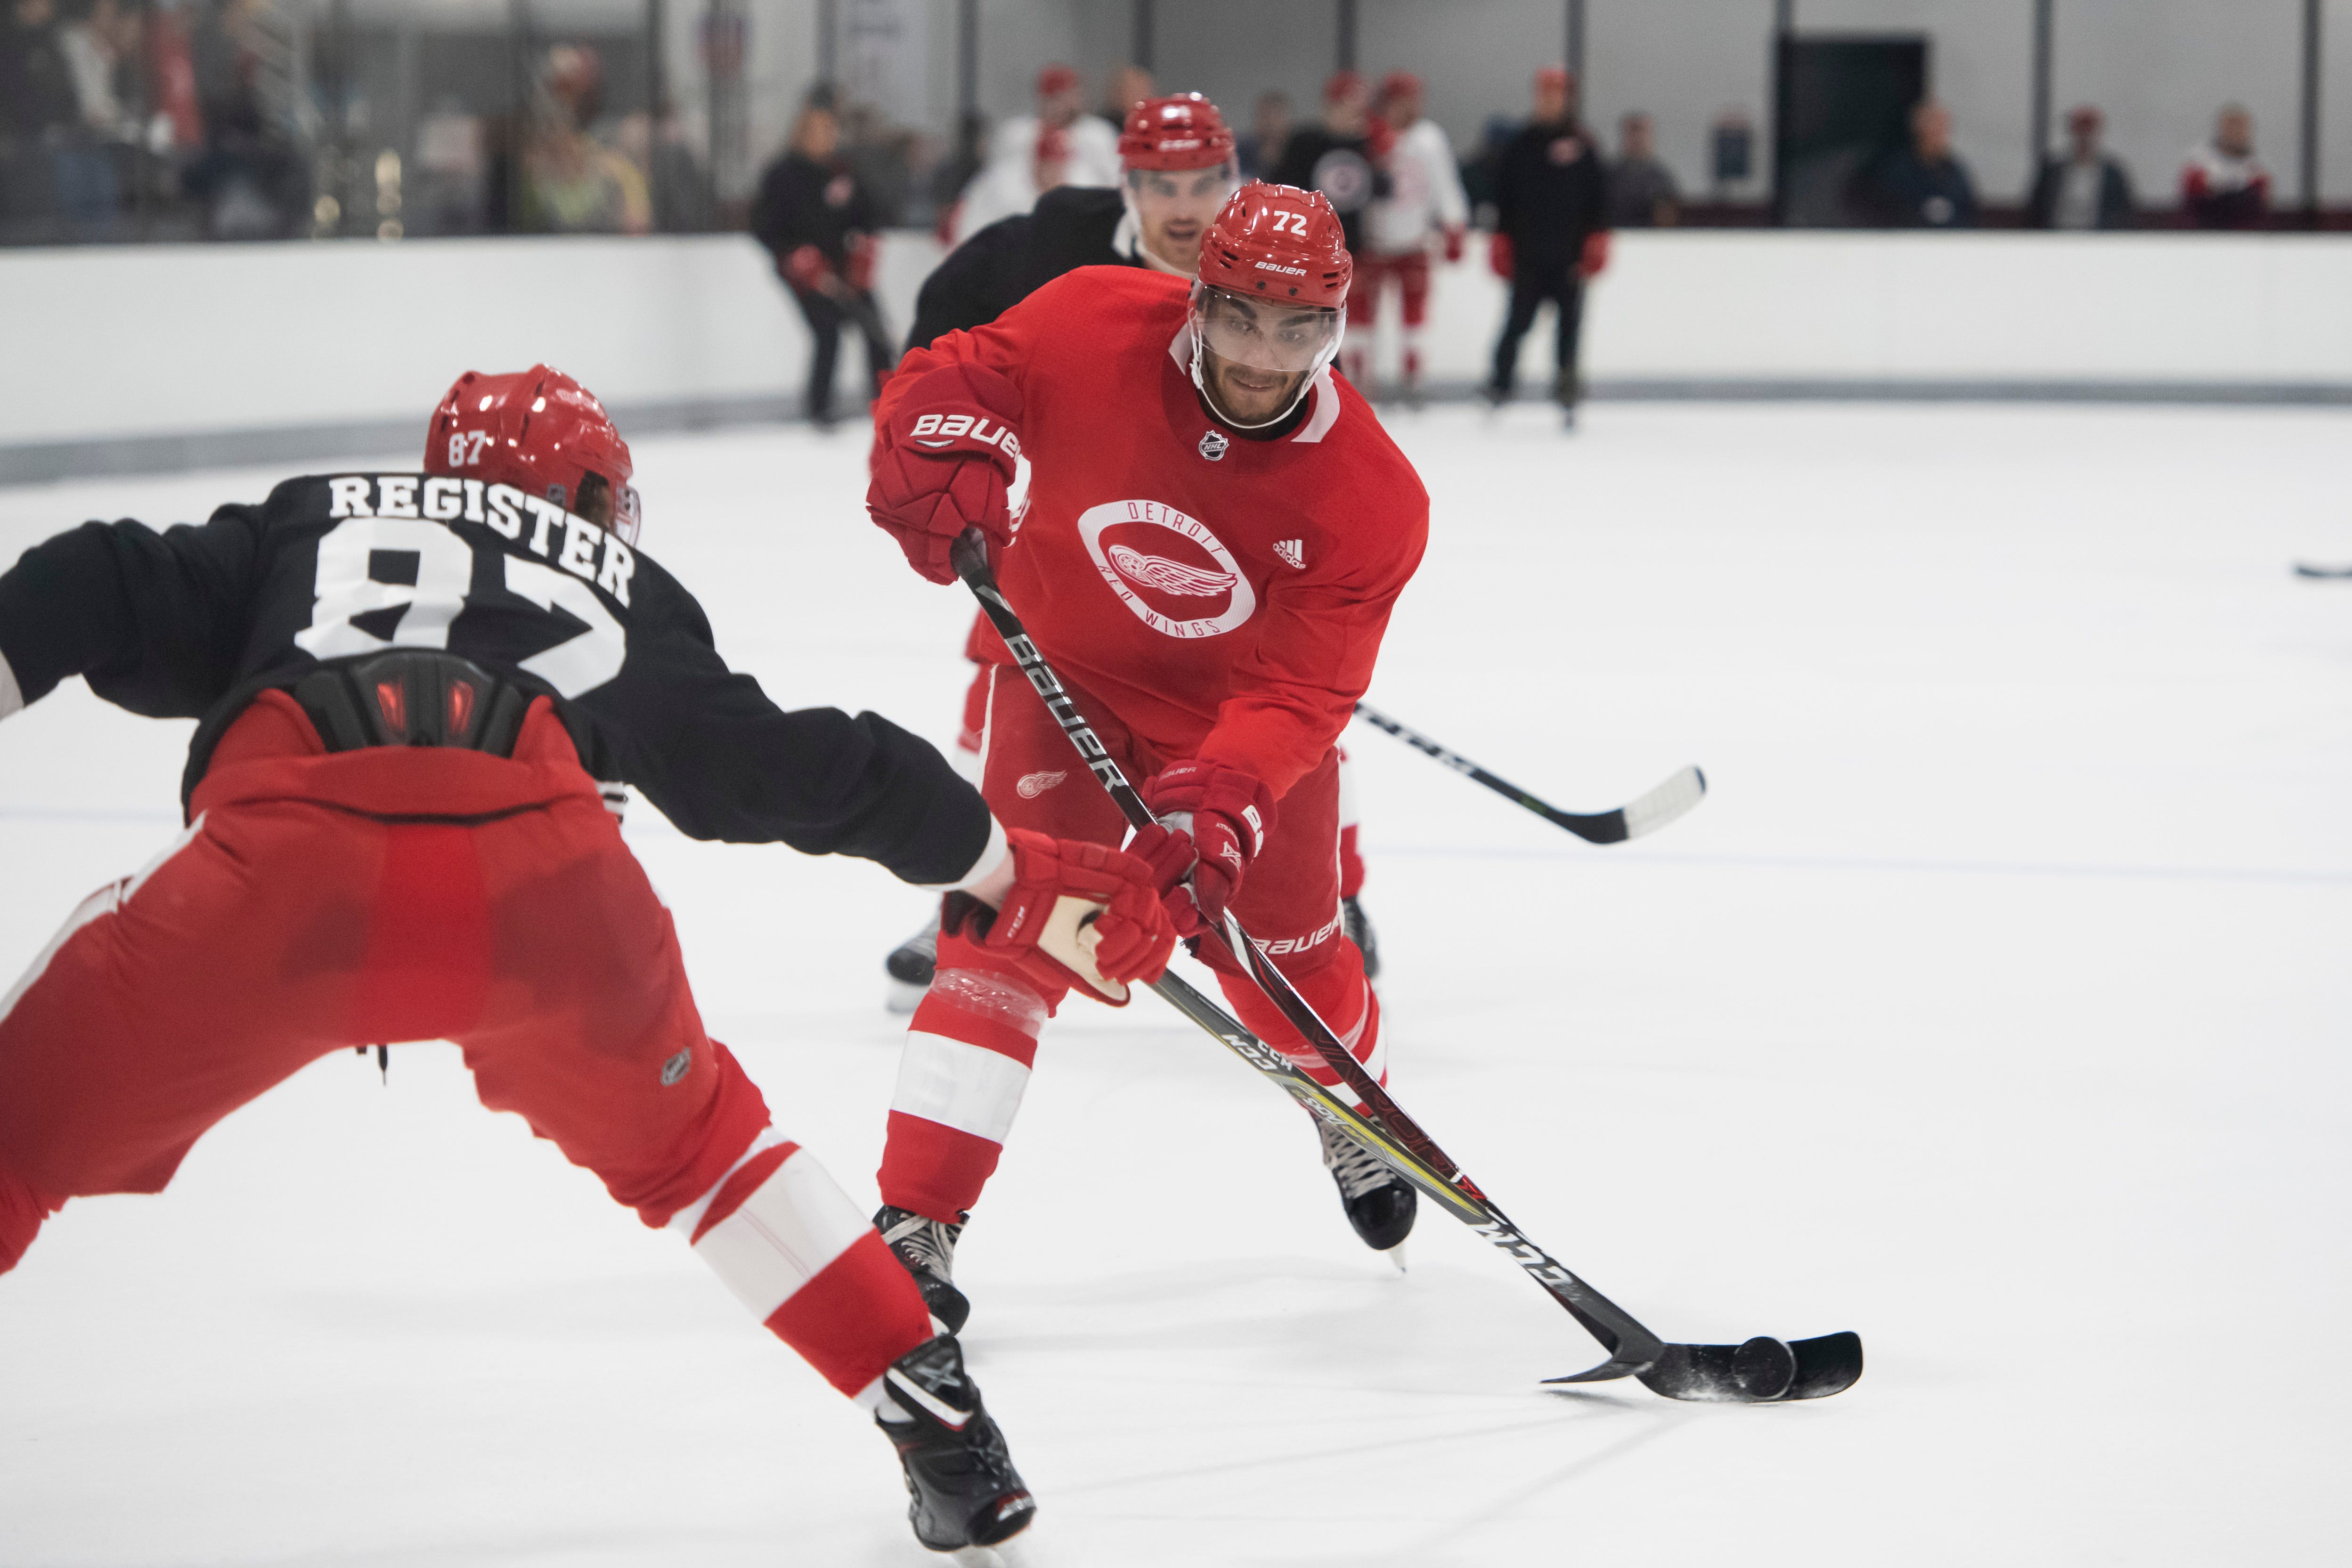 ANDREAS ATHANASIOU: AGE: 24. HT: 6-2. WT: 188. STATS: 71 games, 16 goals, 17 assists, 33 points. ANALYSIS: Given increased ice time in the preseason, Athanasiou was among the most impressive players on the roster. It’ll be interesting to watch if that carries over into the regular season.